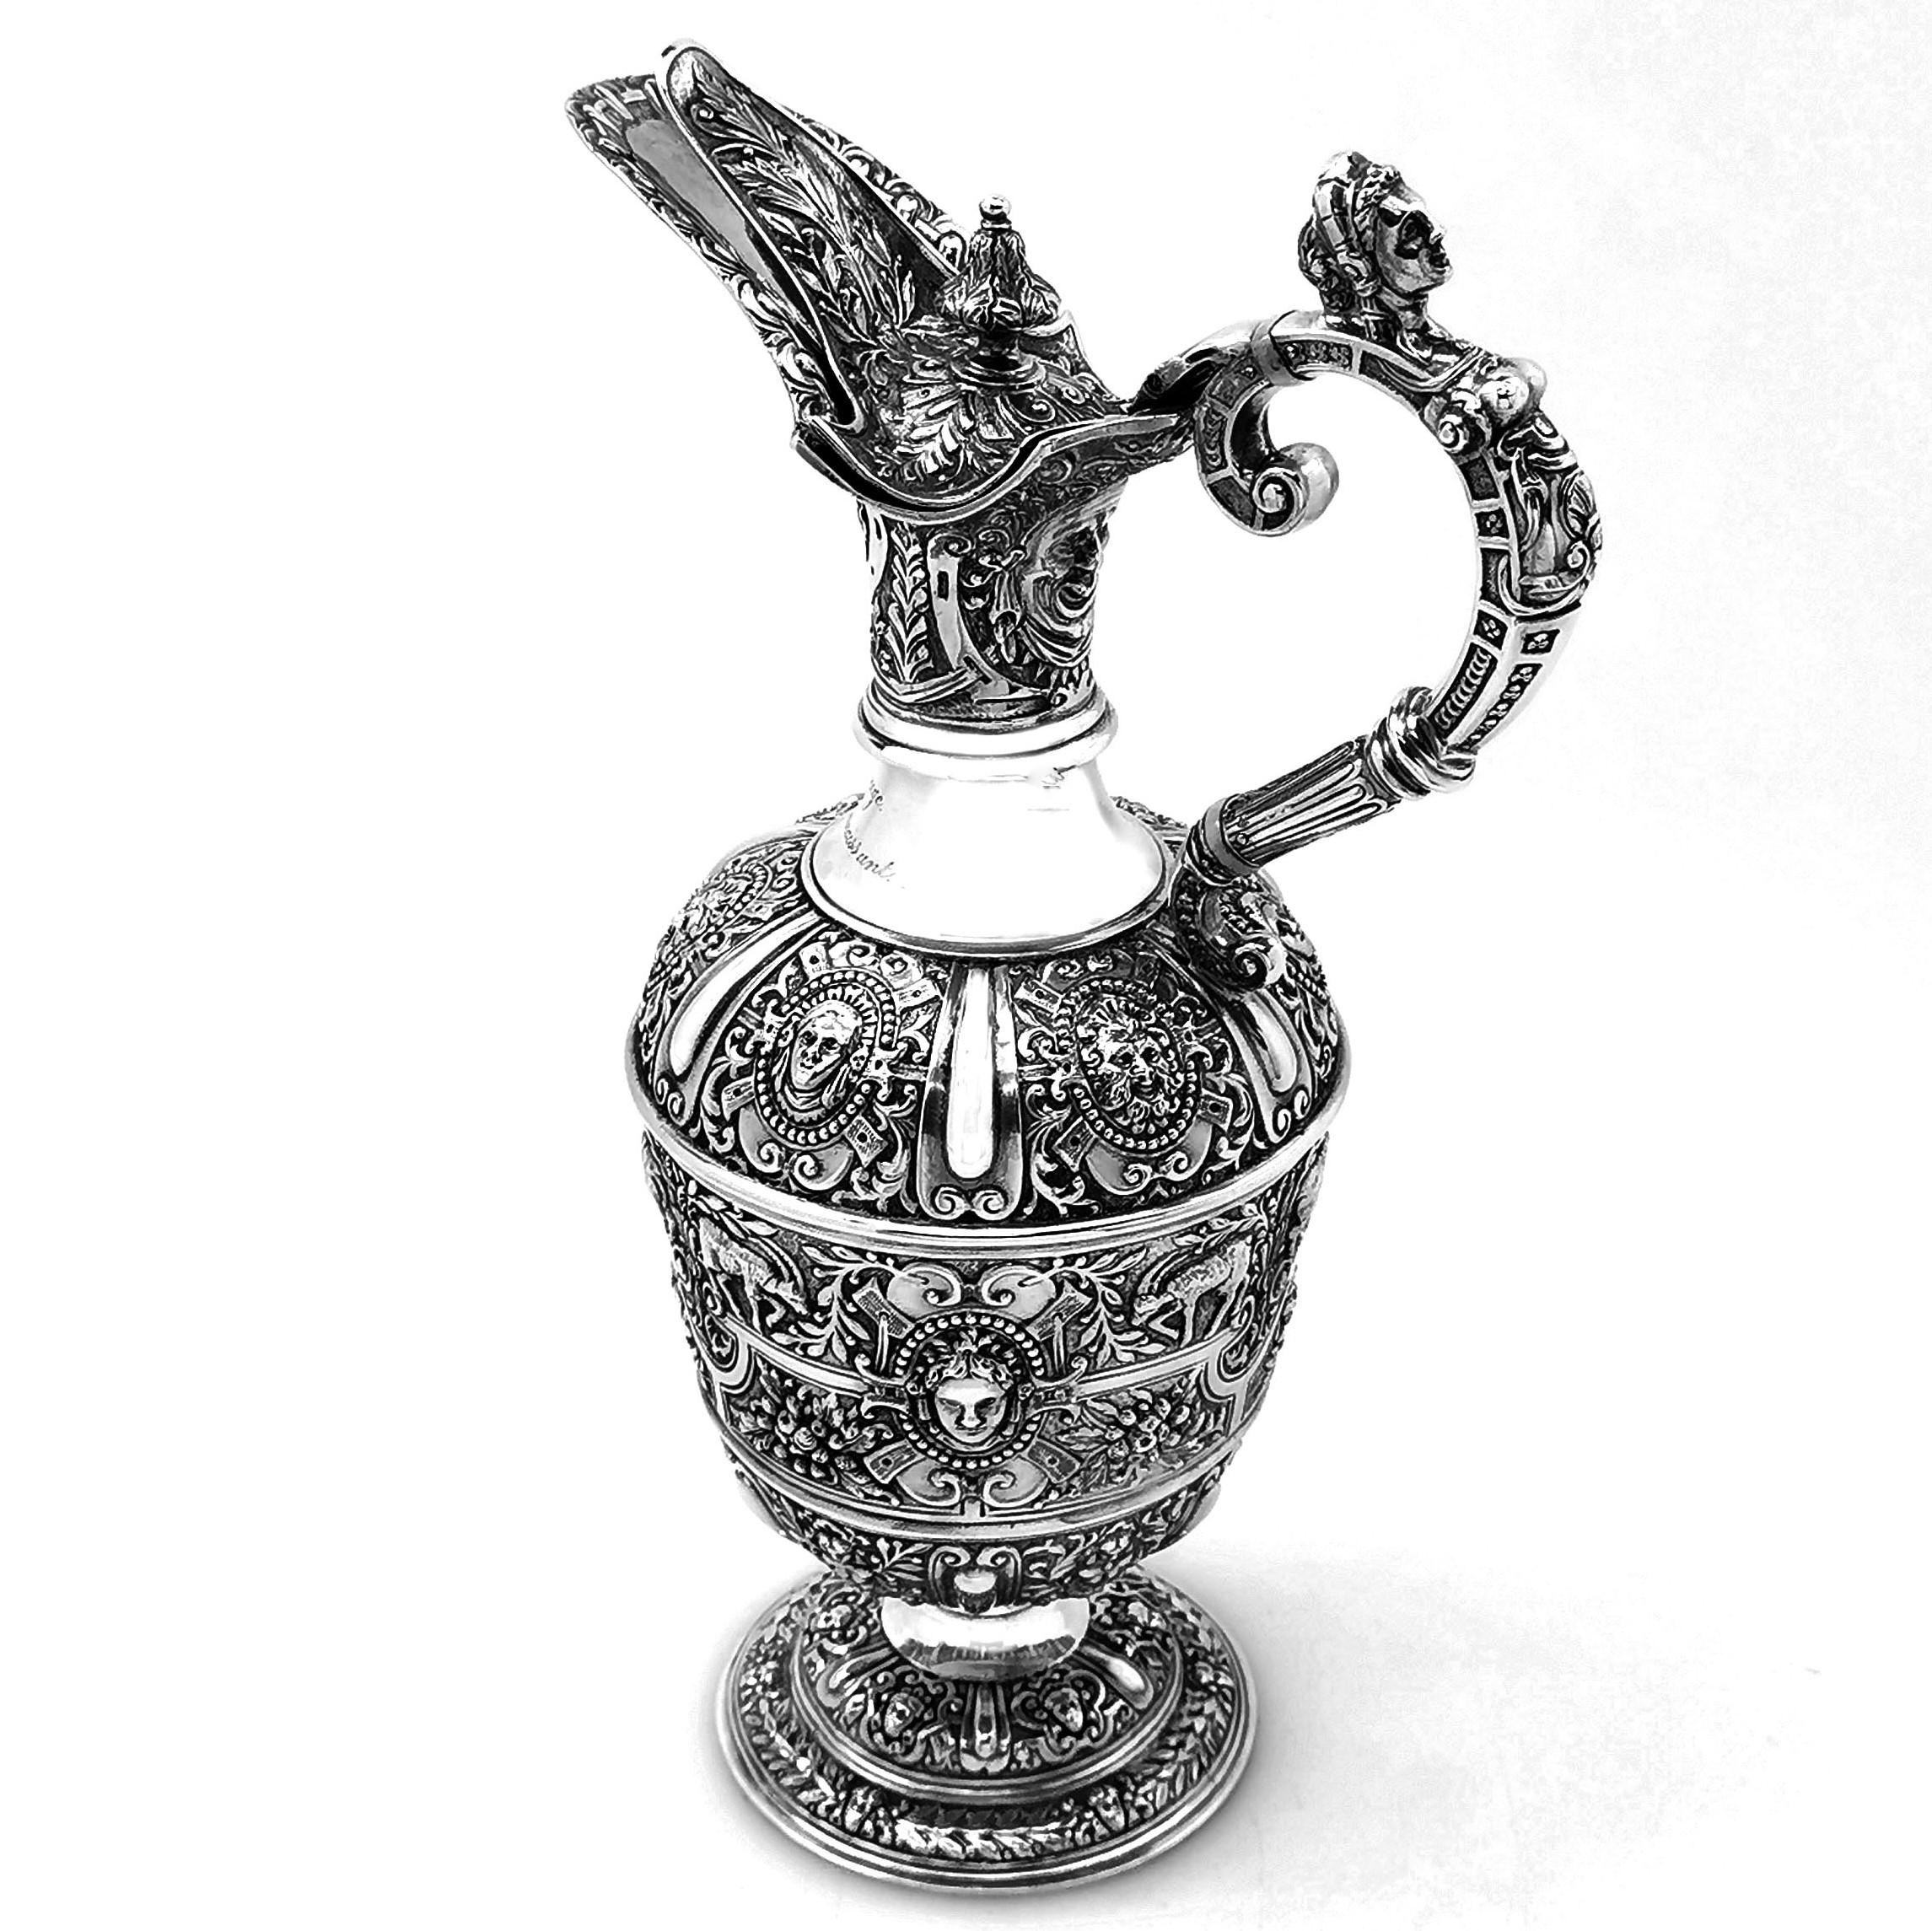 A beautiful Classic Antique Victorian solid Silver Jug in the traditional 'Cellini' design. The Jug features rich, detailed patterning and a figural handle and thumb piece. The Jug has a small engraving on the neck.

Made in London in 1889 by JN